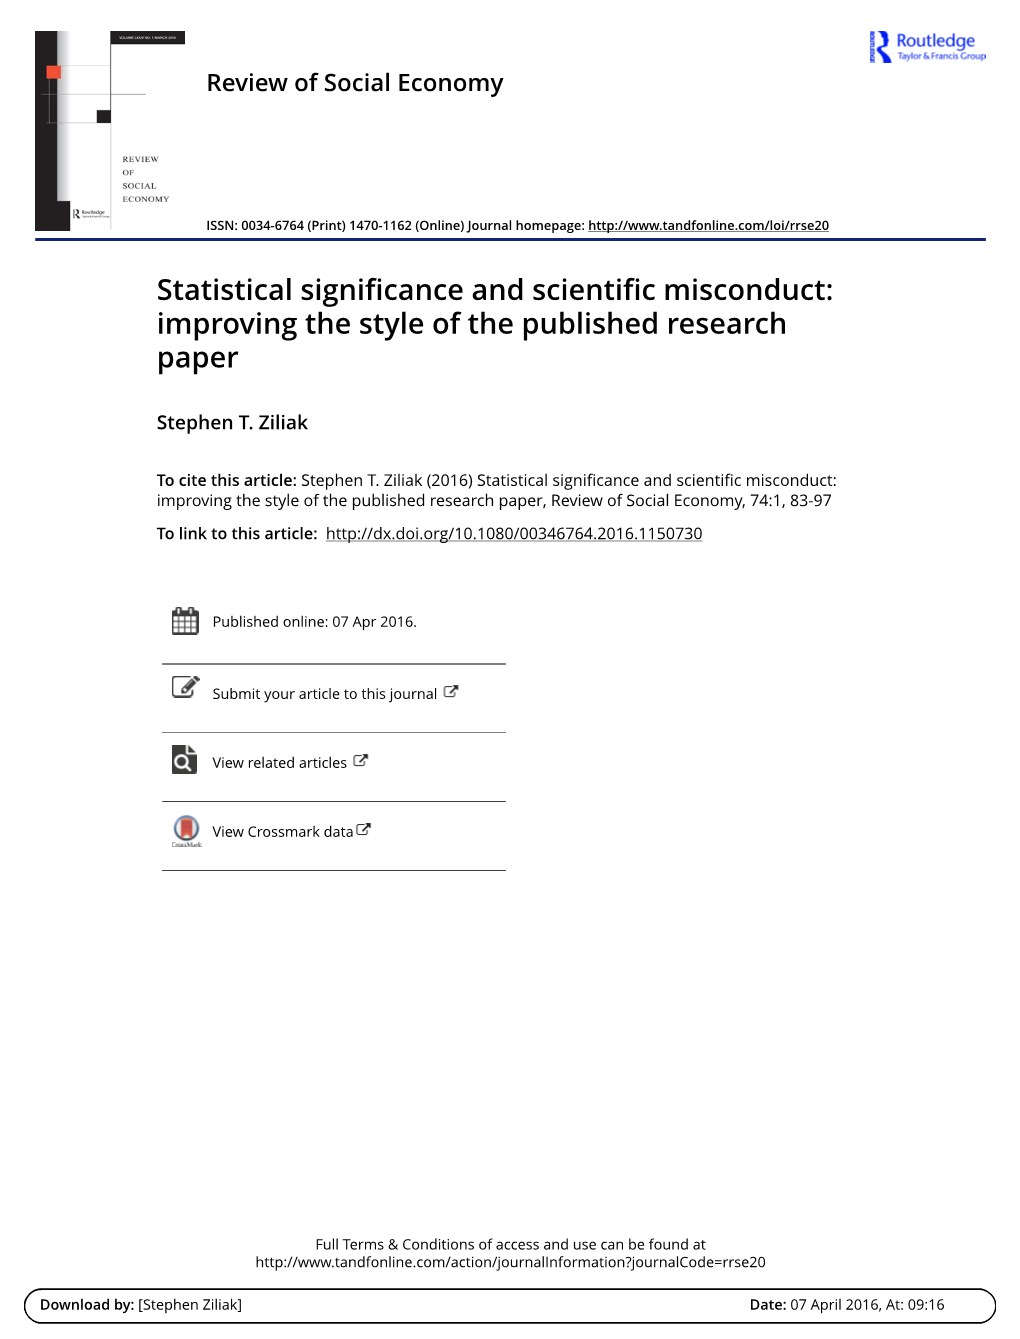 Statistical Significance and Scientific Misconduct: Improving the Style of the Published Research Paper